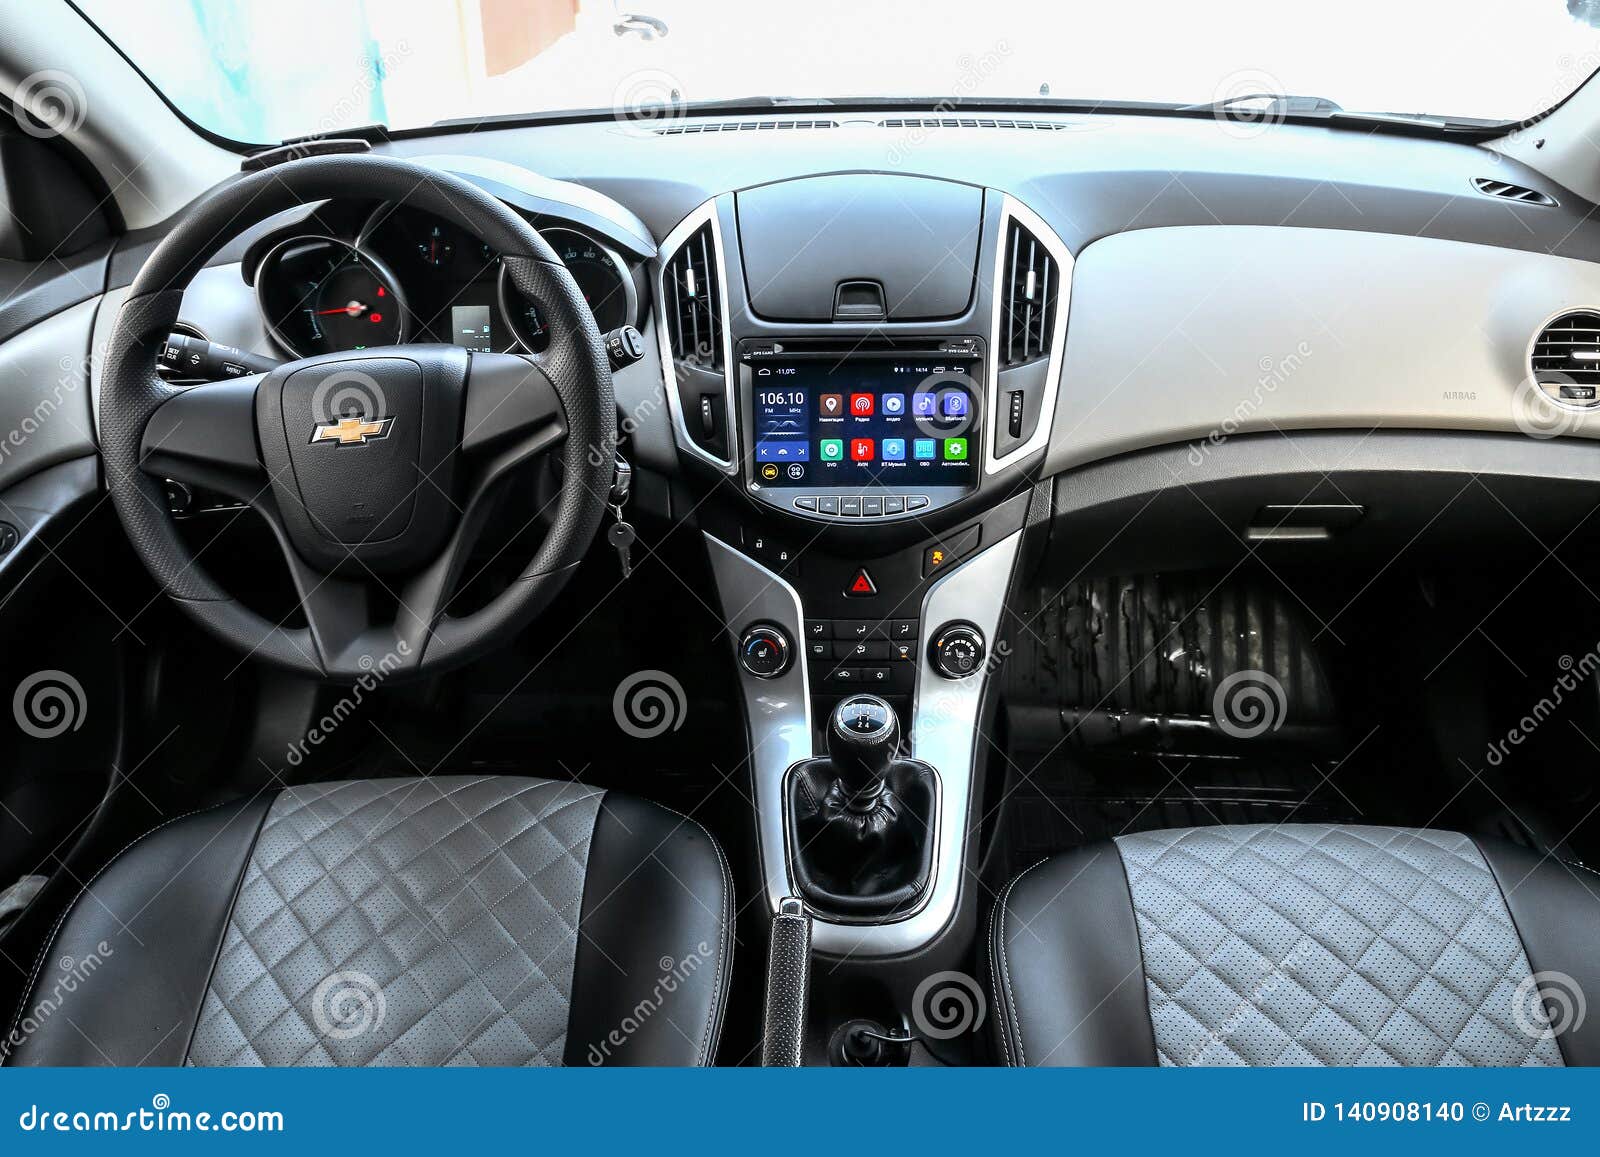 Chevrolet Cruze Editorial Image Image Of Compact